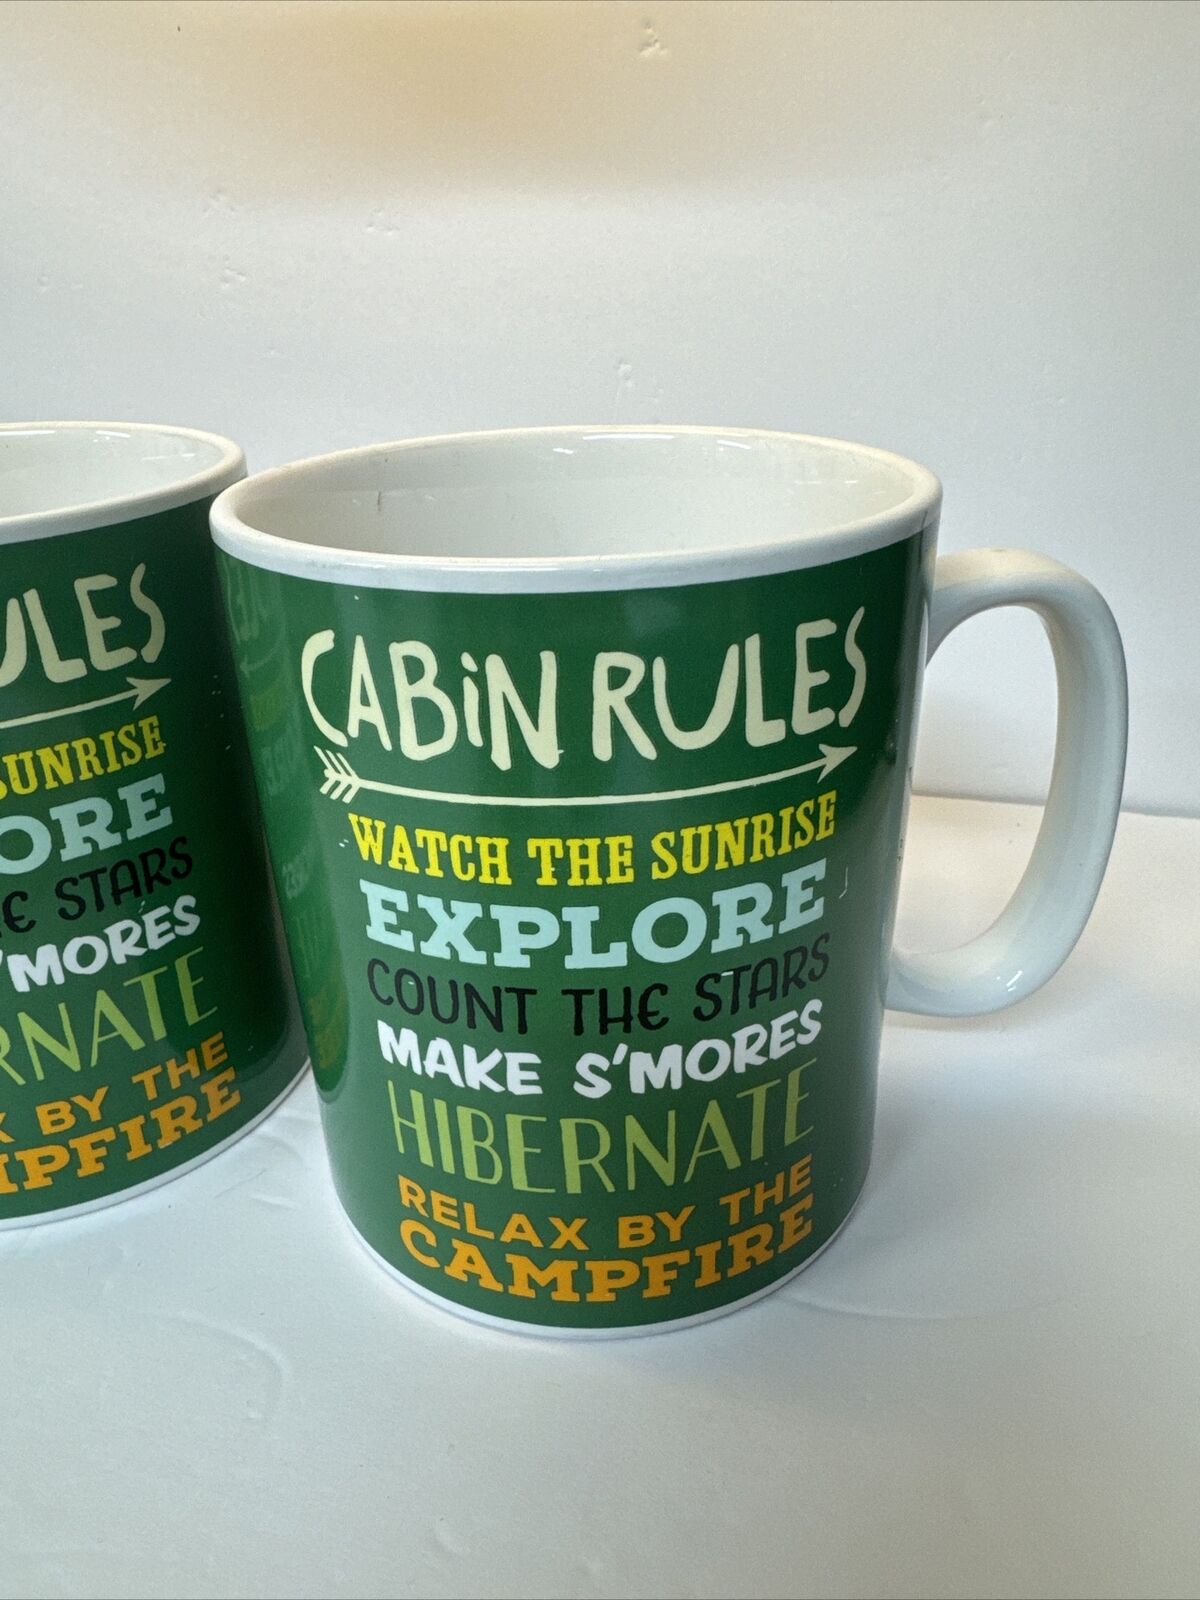 2 Large Mugs Cabin Rules Watch The Sunrise Make S’mores 5.25x4”